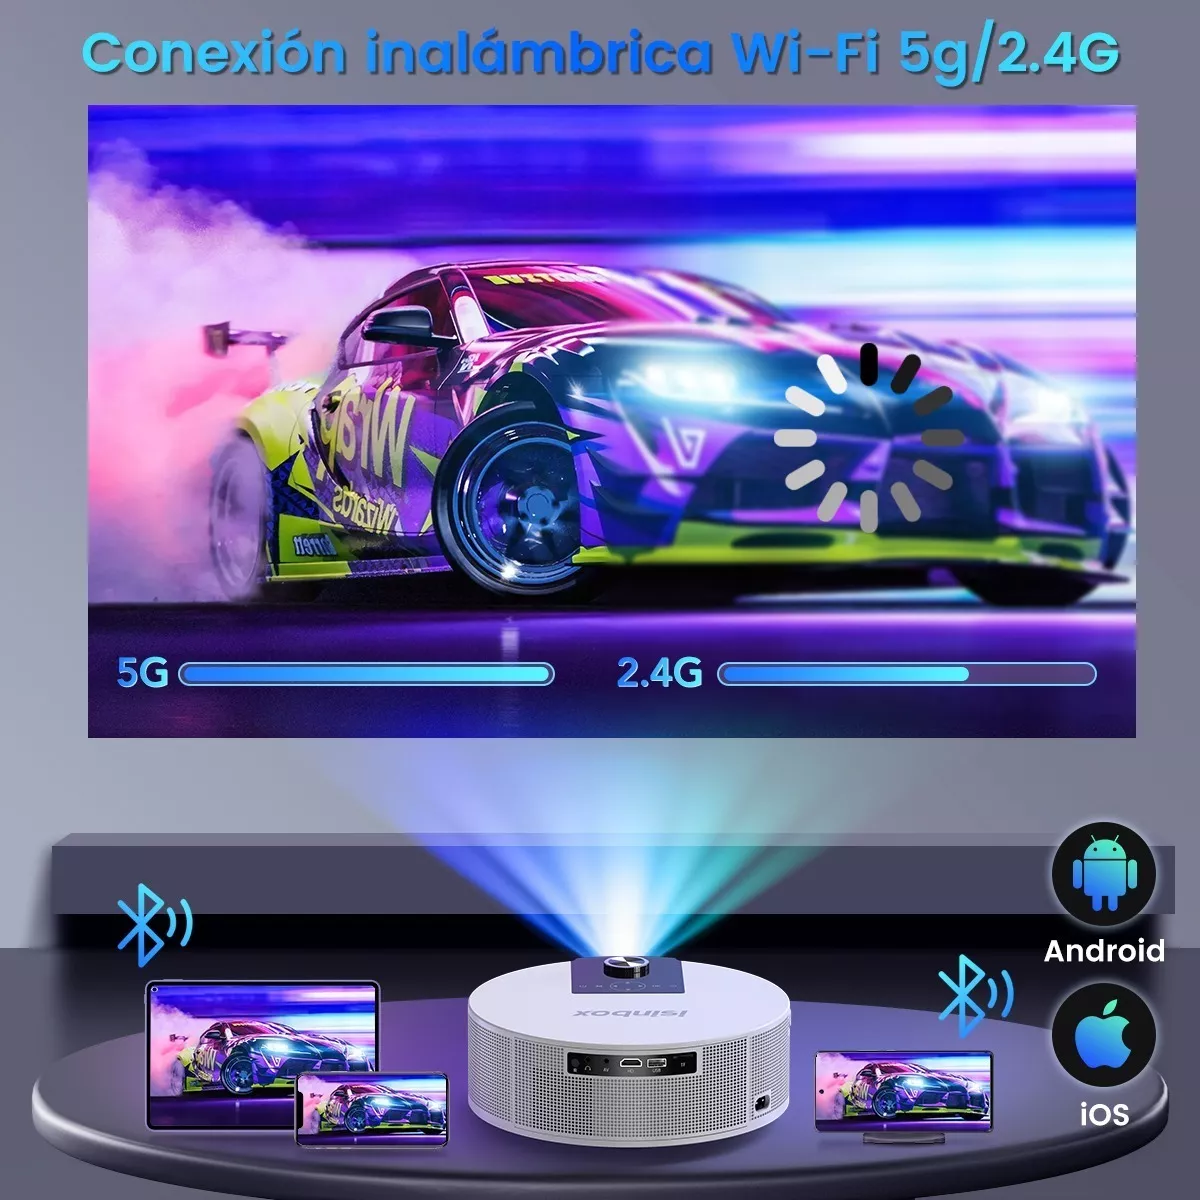 ISINBOX-proyector portátil 4K Q10, 5G, WIFI, Android 9,0